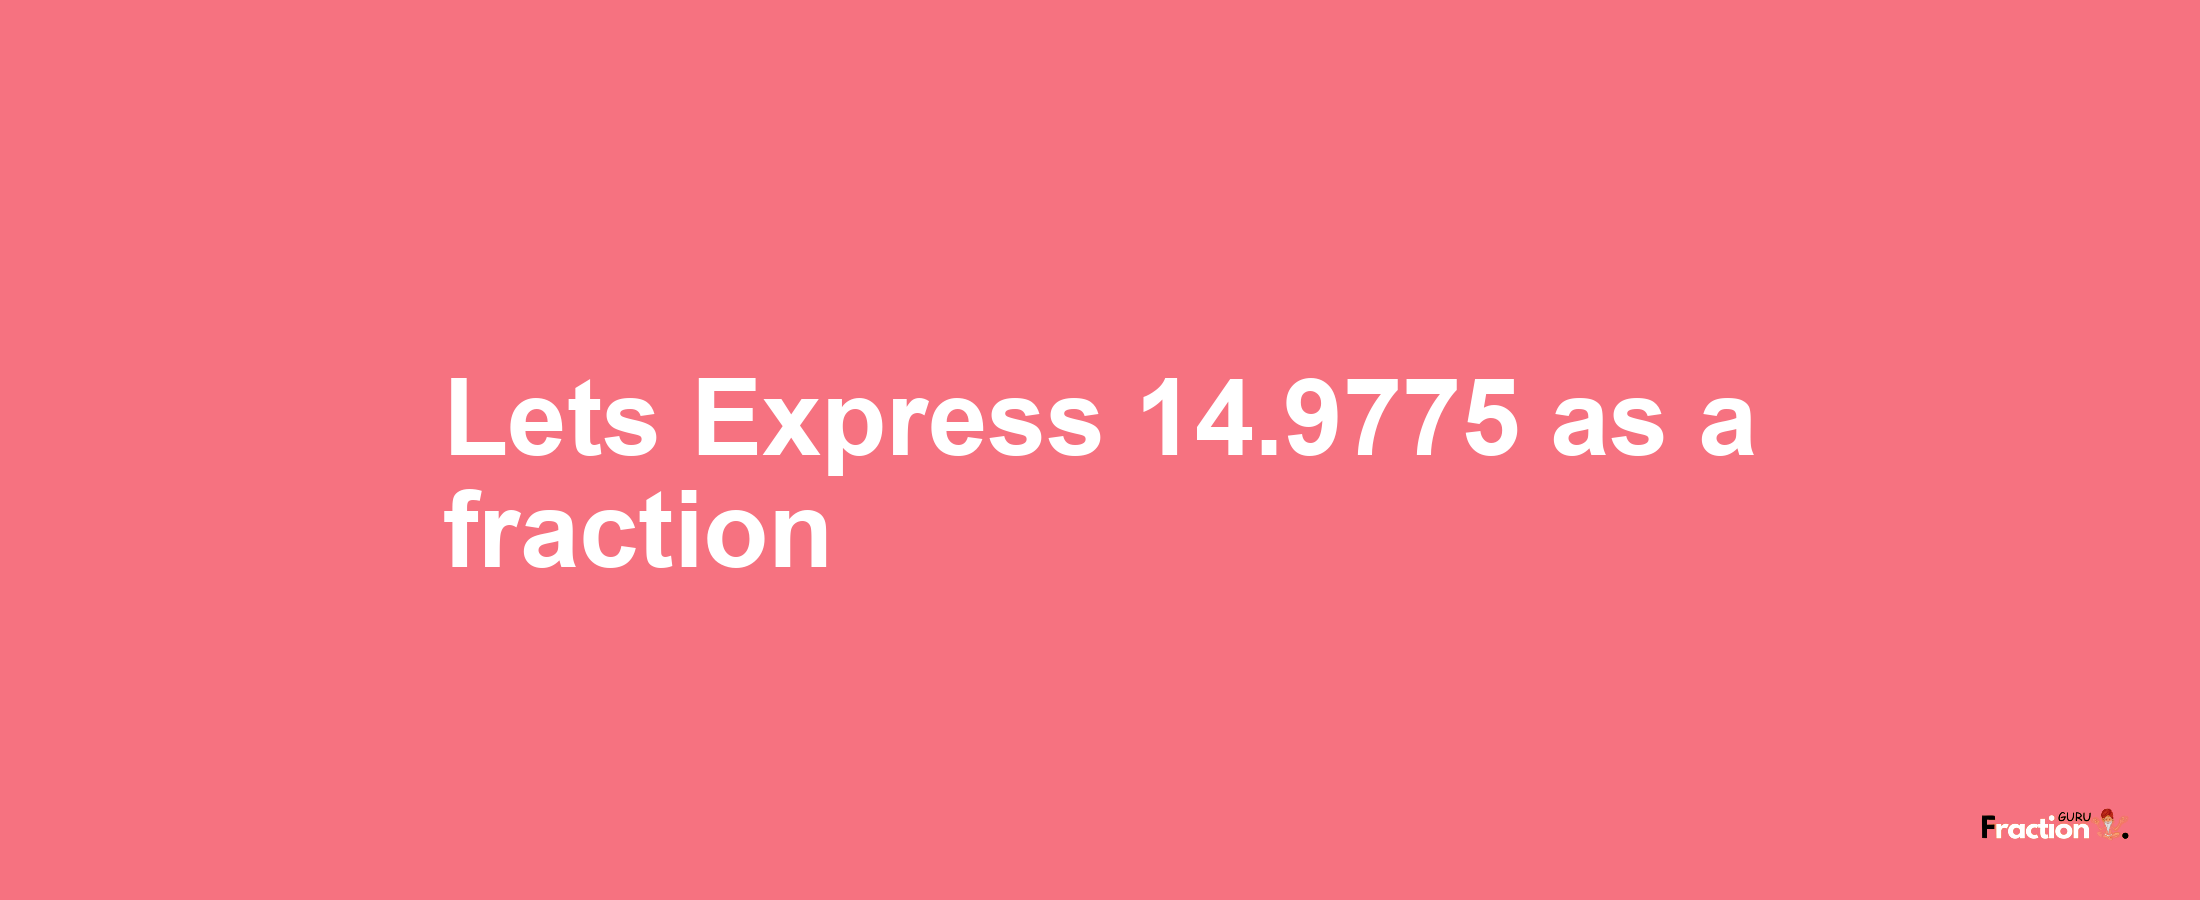 Lets Express 14.9775 as afraction